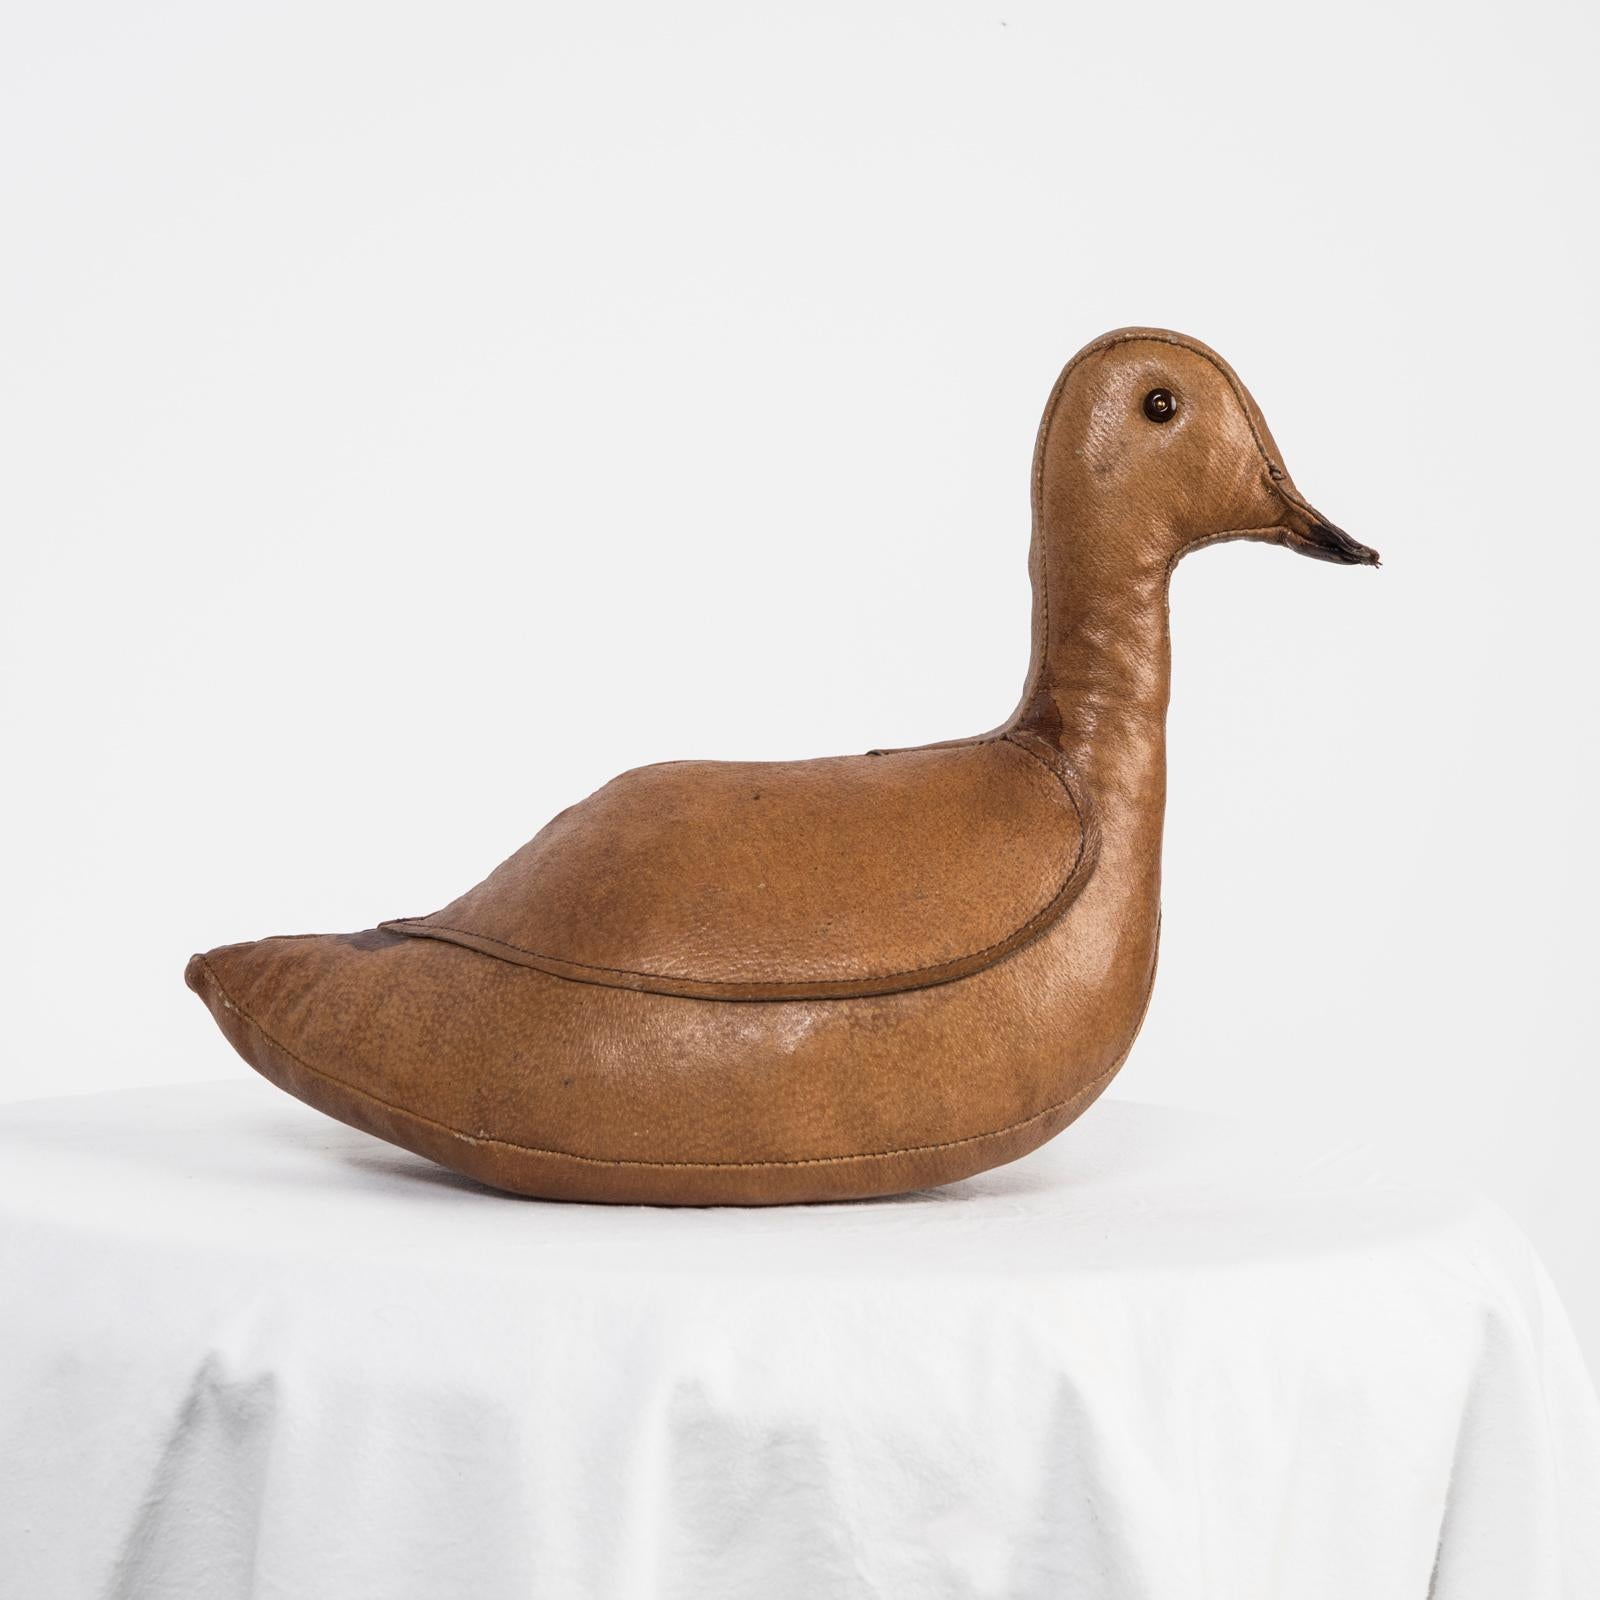 A wonderful example of the leather duck doorstop (or paper weight) by Dimitri Omersa for Abercrombie and Fitch, circa 1950s.

This is a collectible early production example and ready to be used as a floor door stop or consider using it as a tabletop